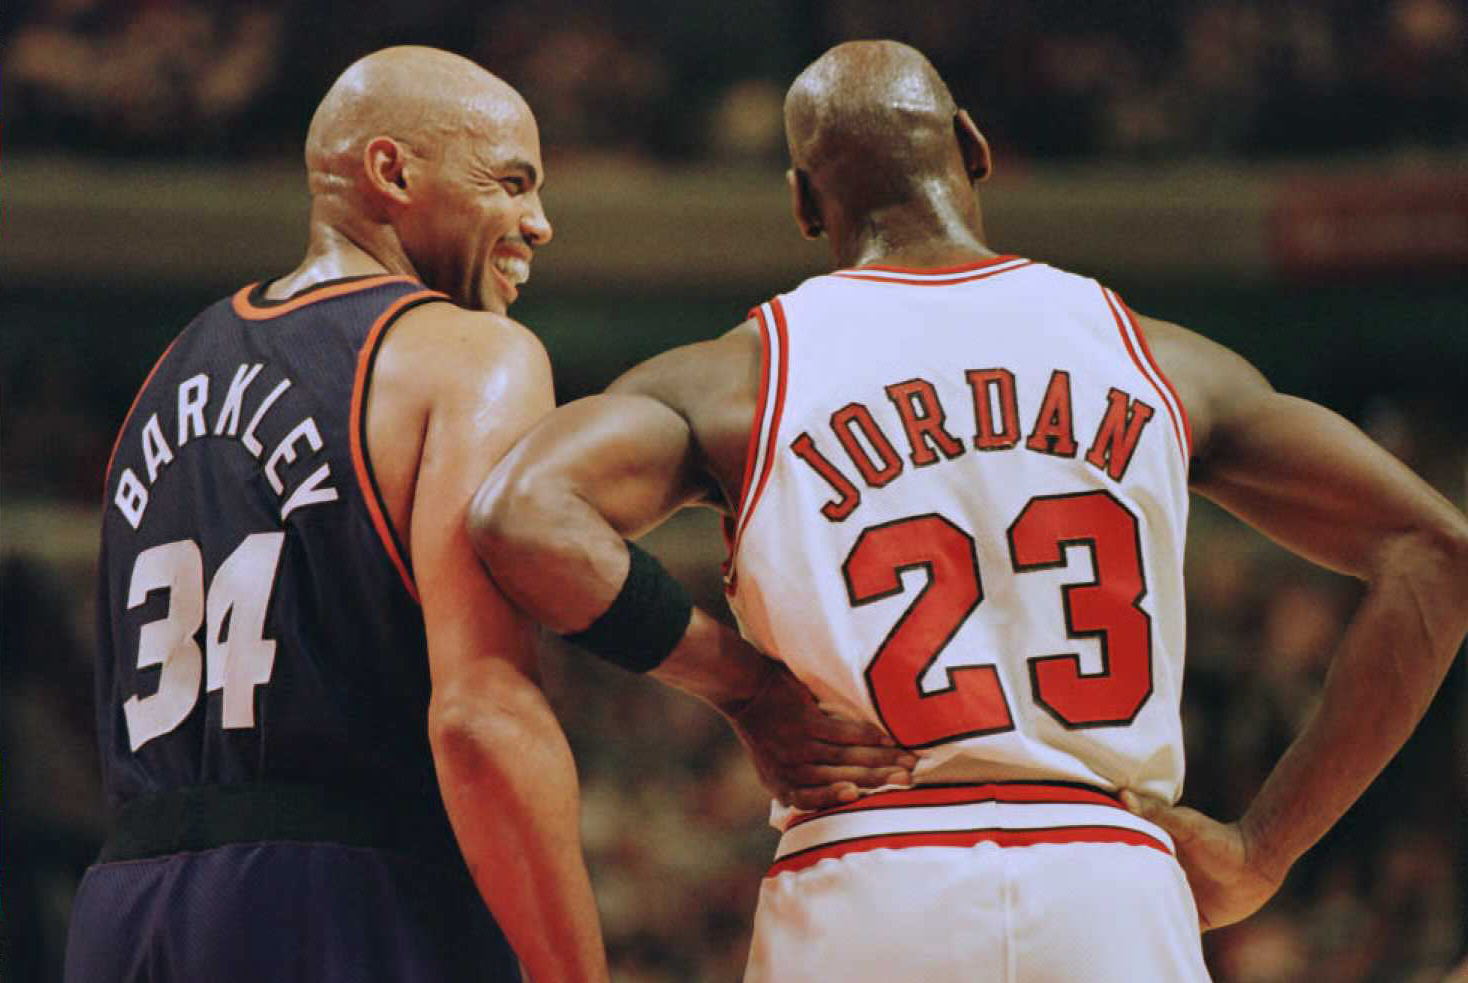 Charles Barkley and Michael Jordan tak during a game in 1996.